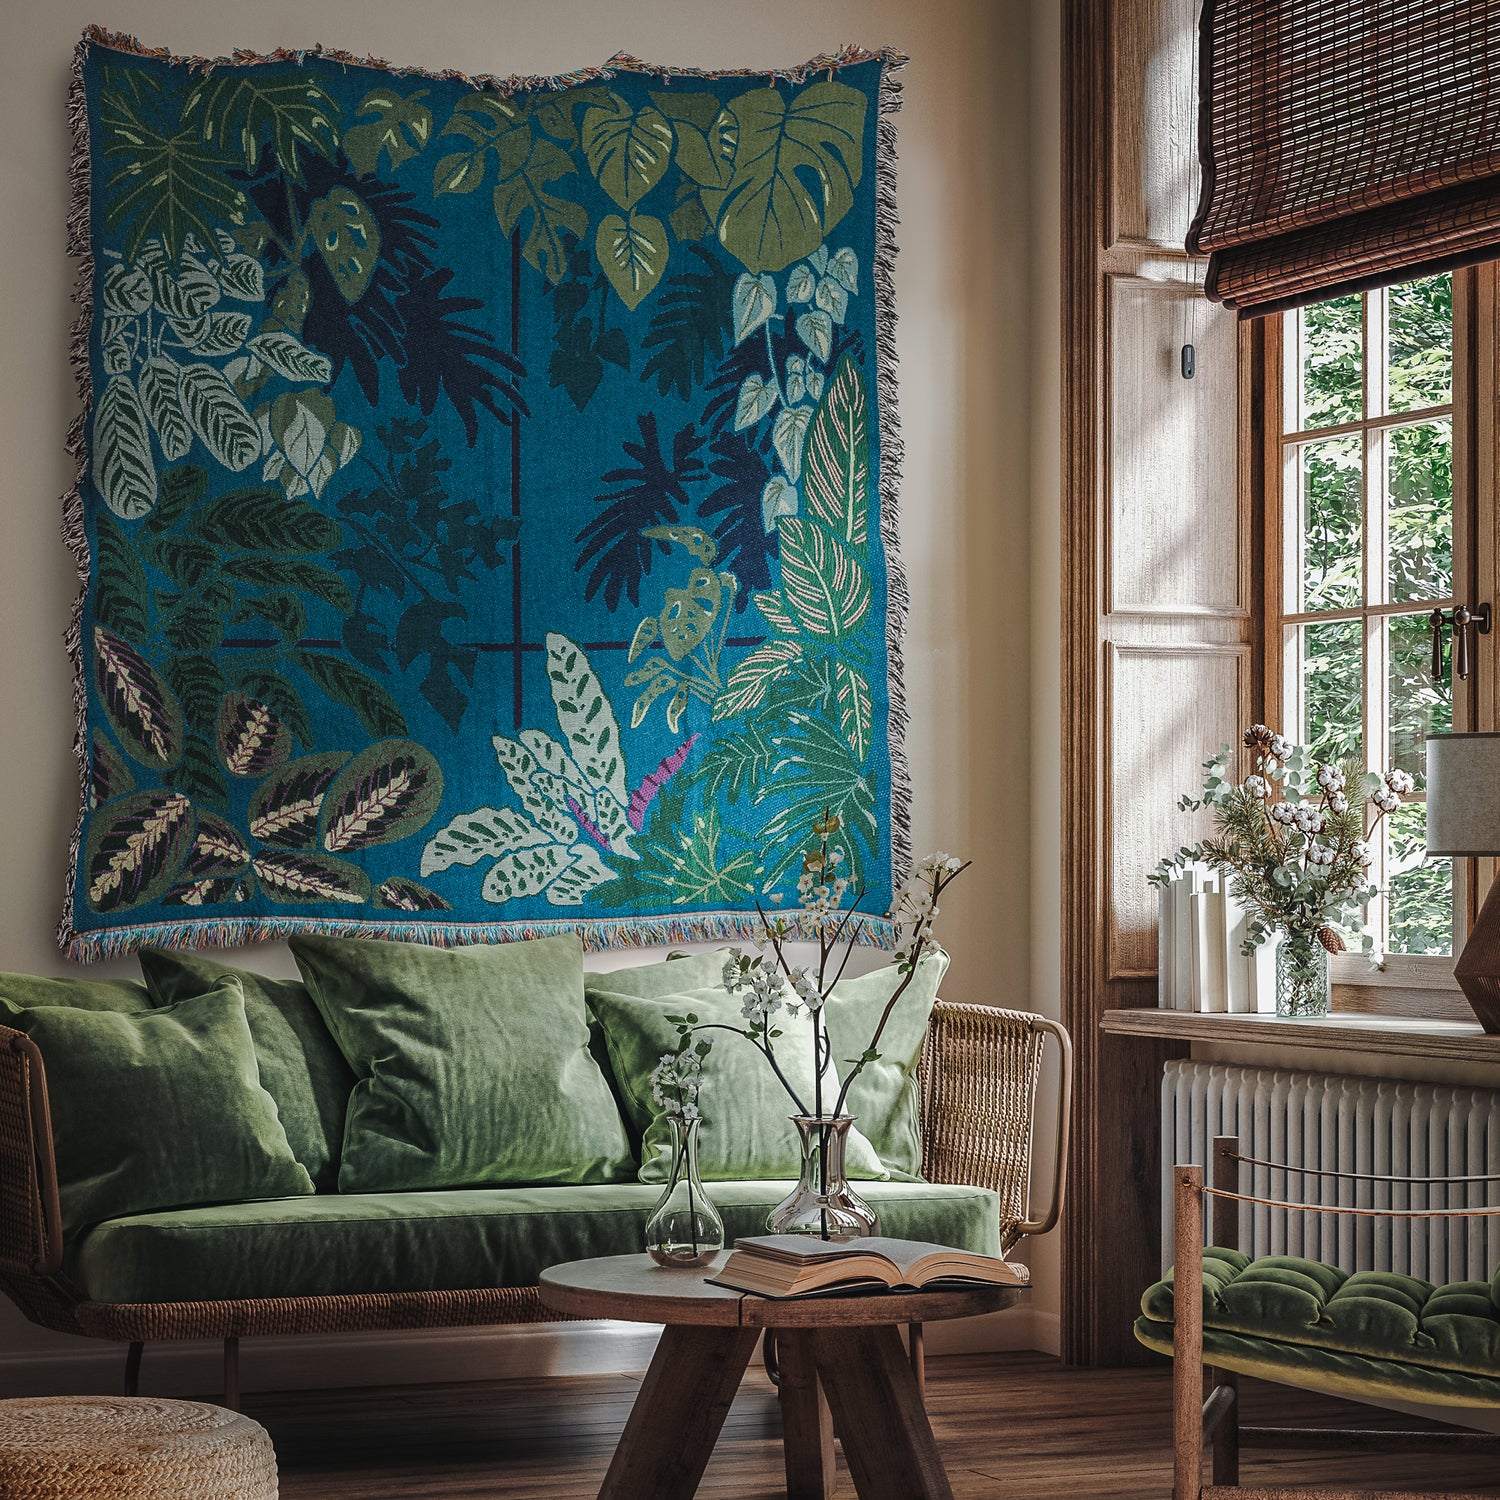 Teal and green woven blanket featuring houseplants hung as a tapestry on the wall  in a living room